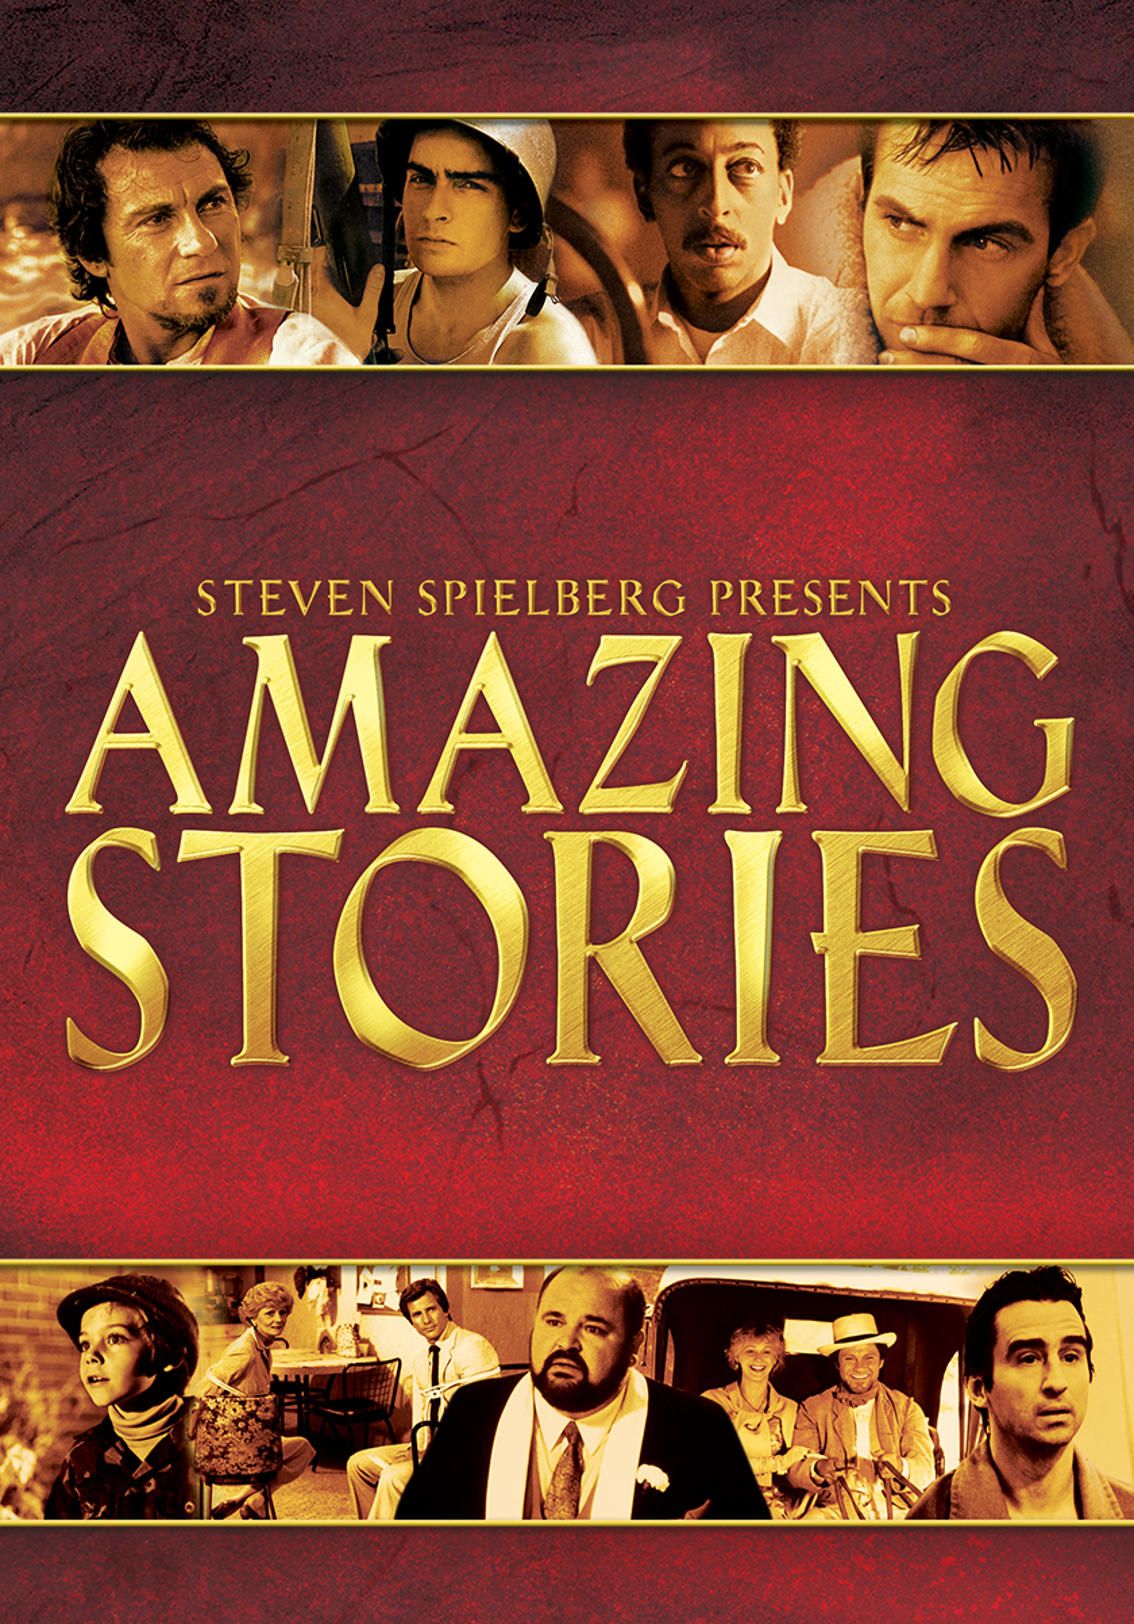 Poster for Steven Spielberg's 1985 TV series Amazing Stories.